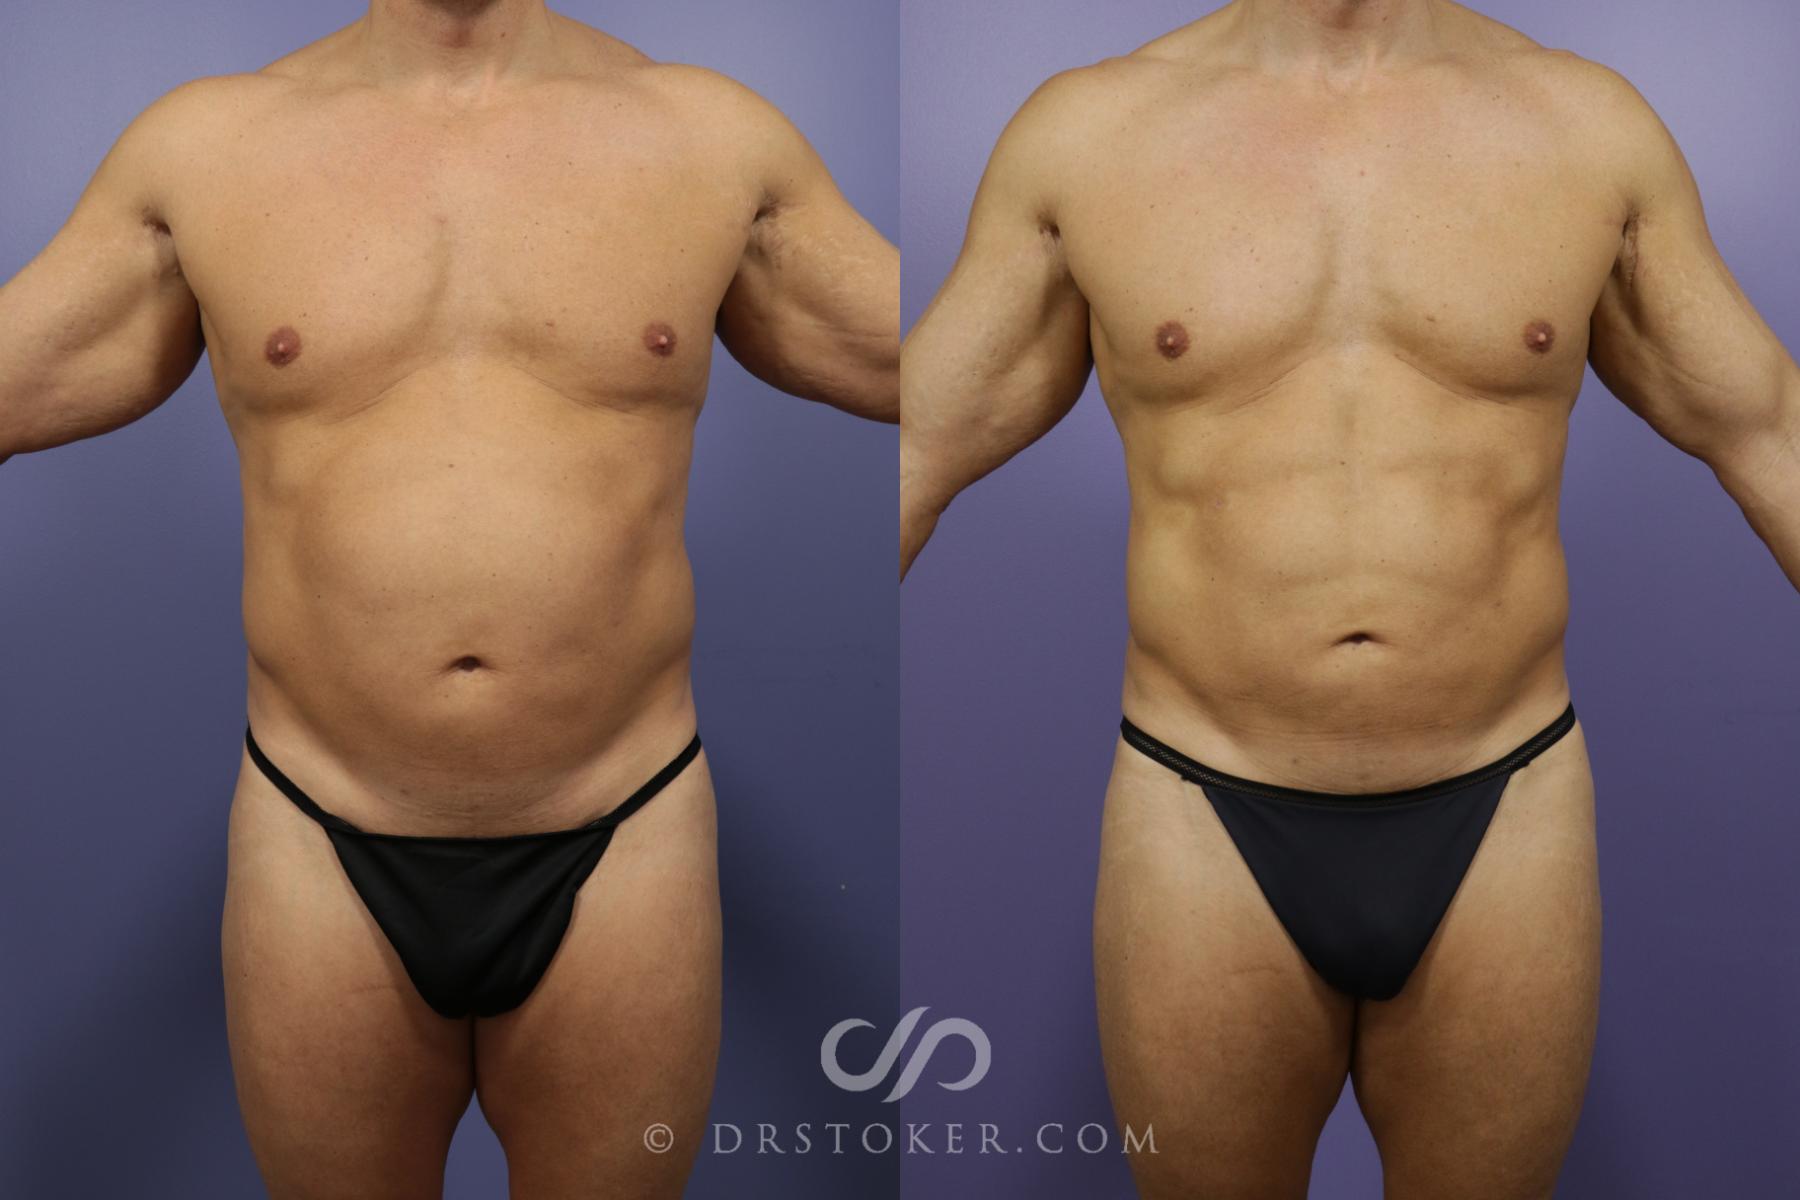 Our Before & After Body Sculpting Results in LA